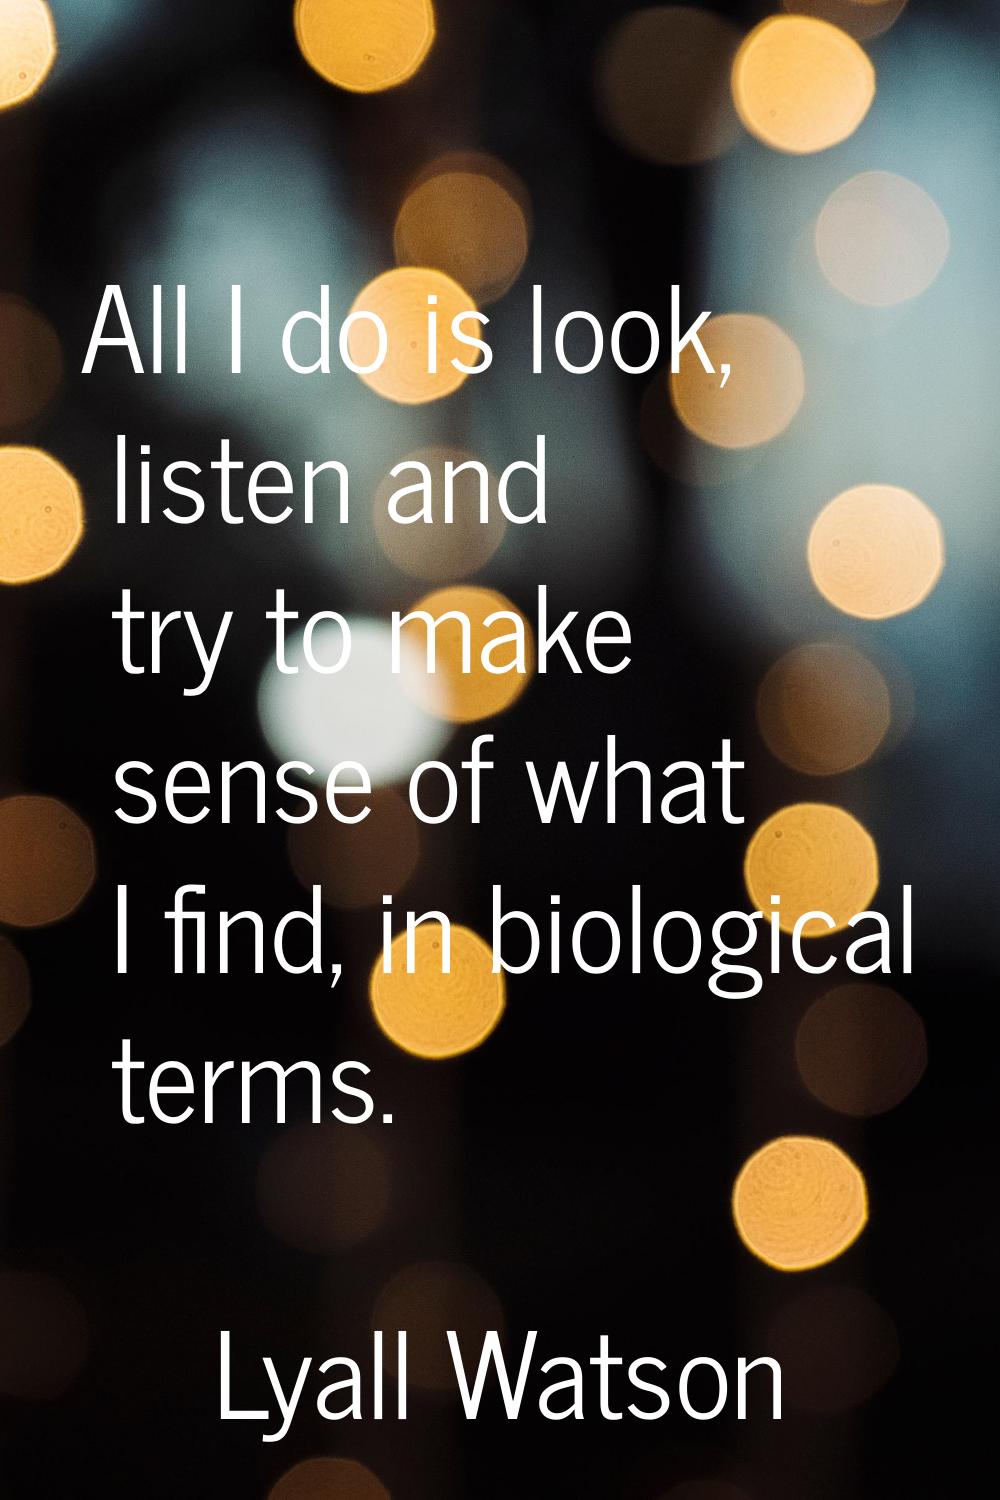 All I do is look, listen and try to make sense of what I find, in biological terms.